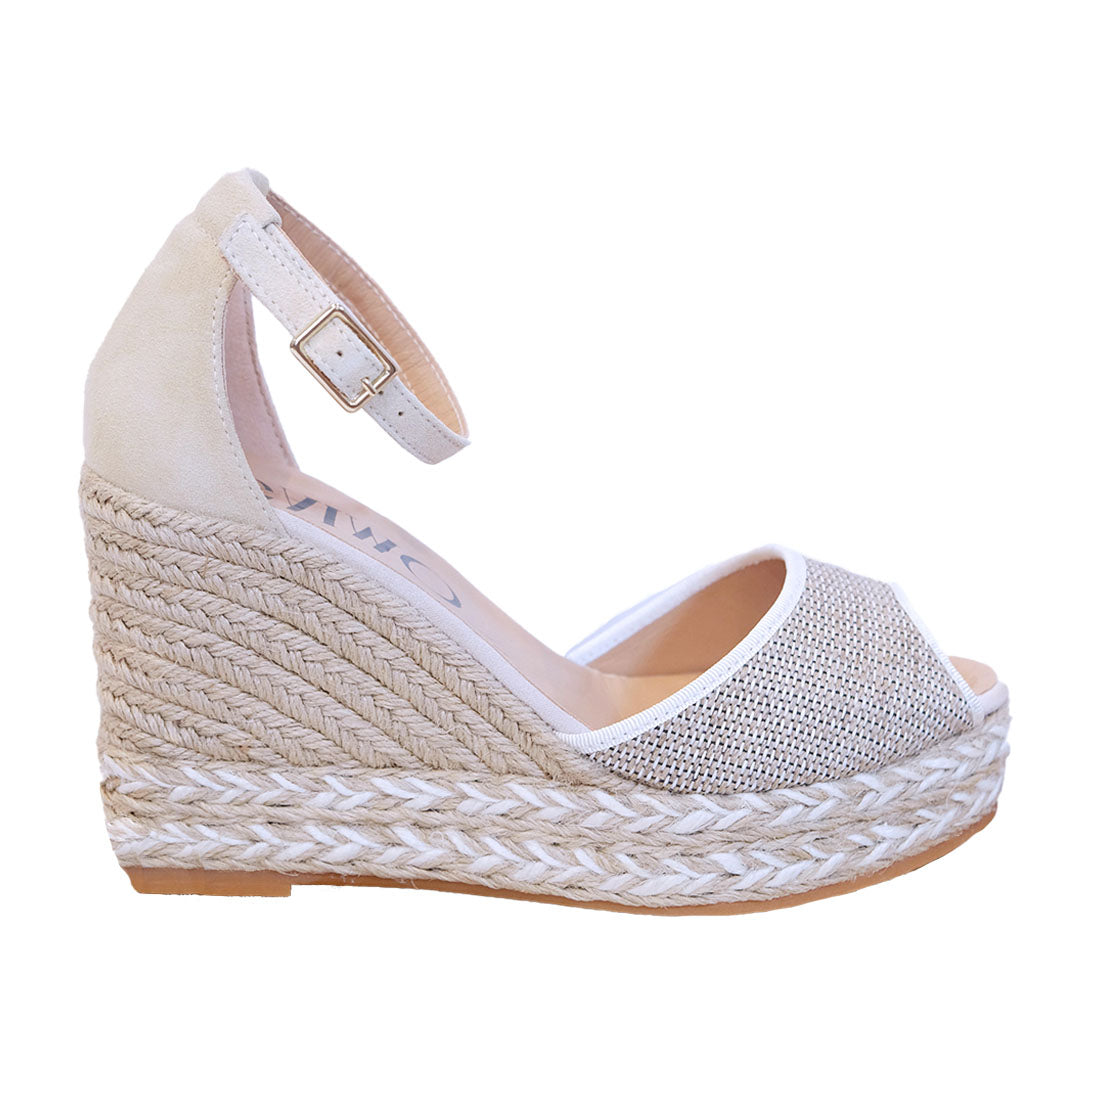 Espadrilles wedges handmade in Suede, jute and raffia comfortable shoes